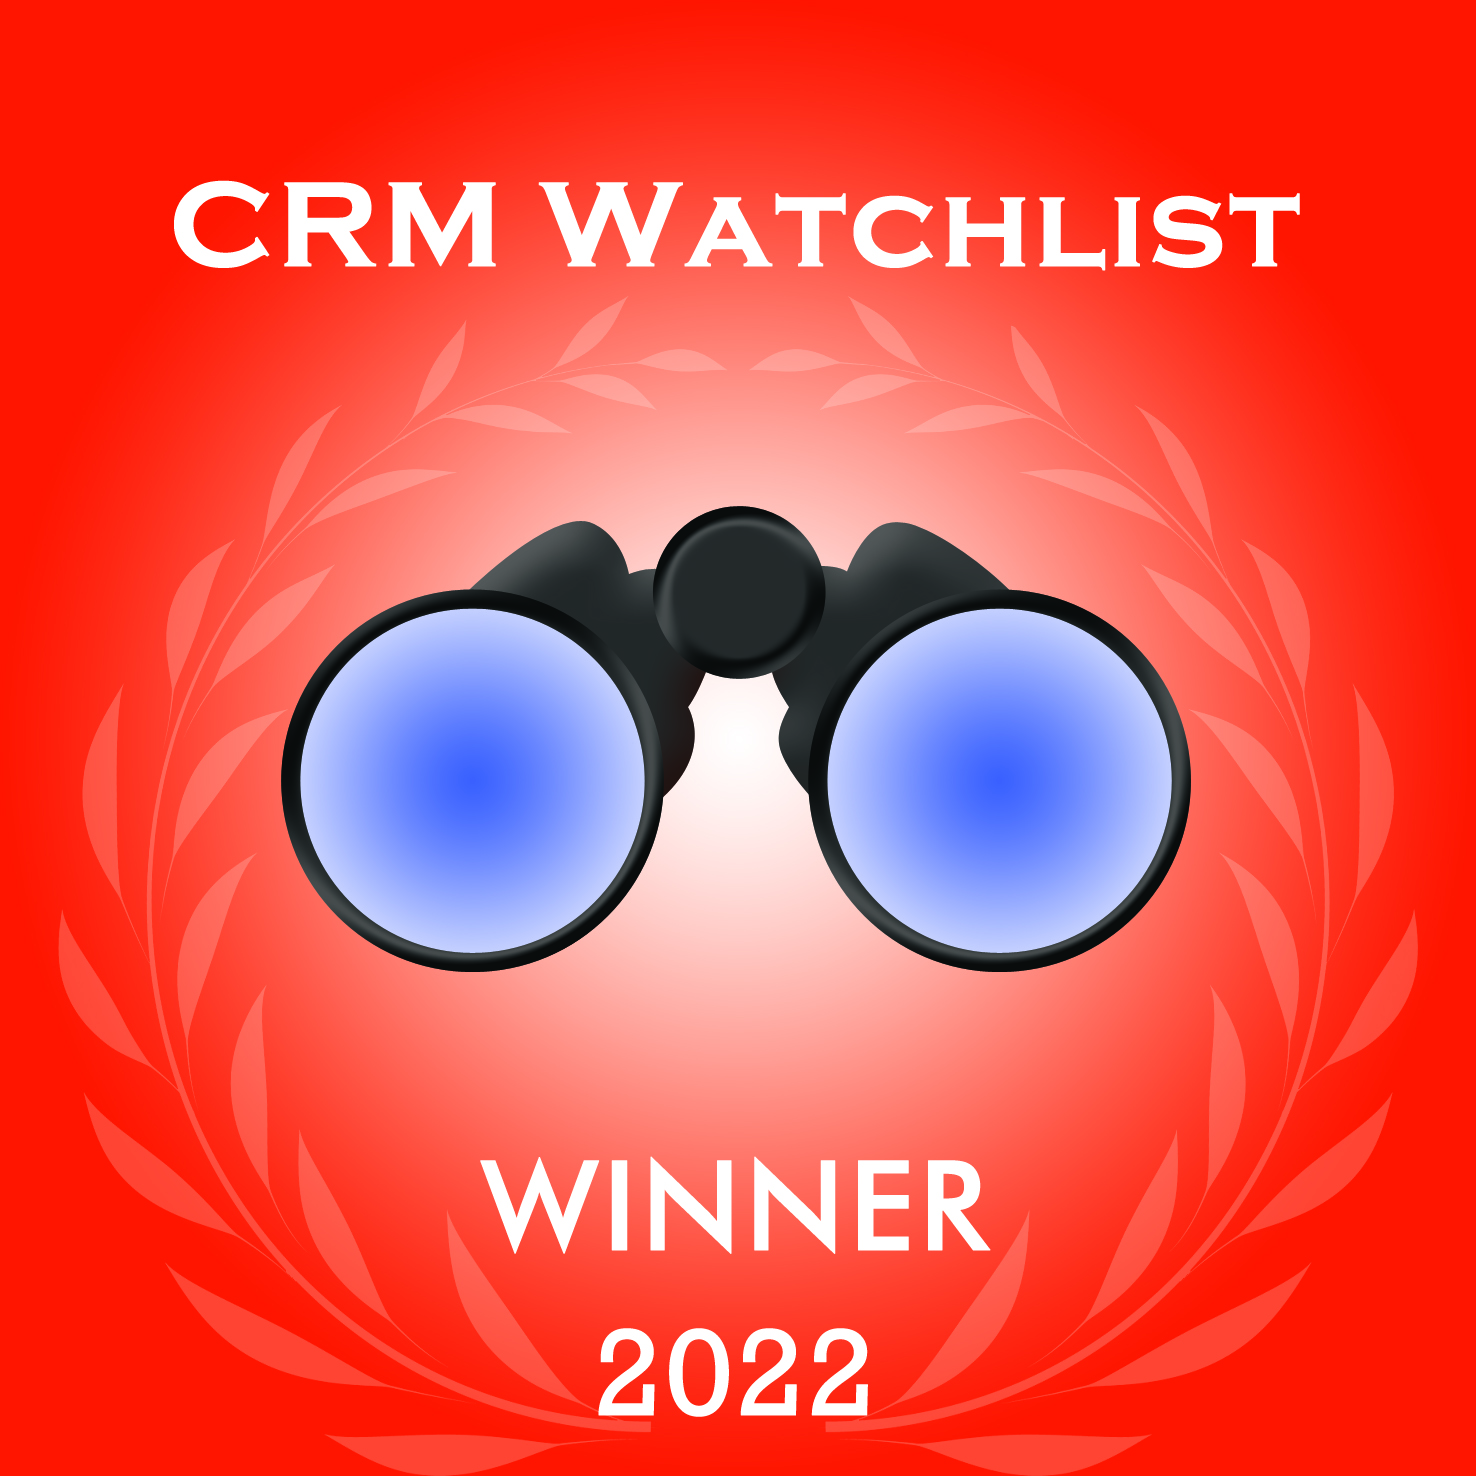 Anaplan Named a 2022 CRM Watchlist Winner